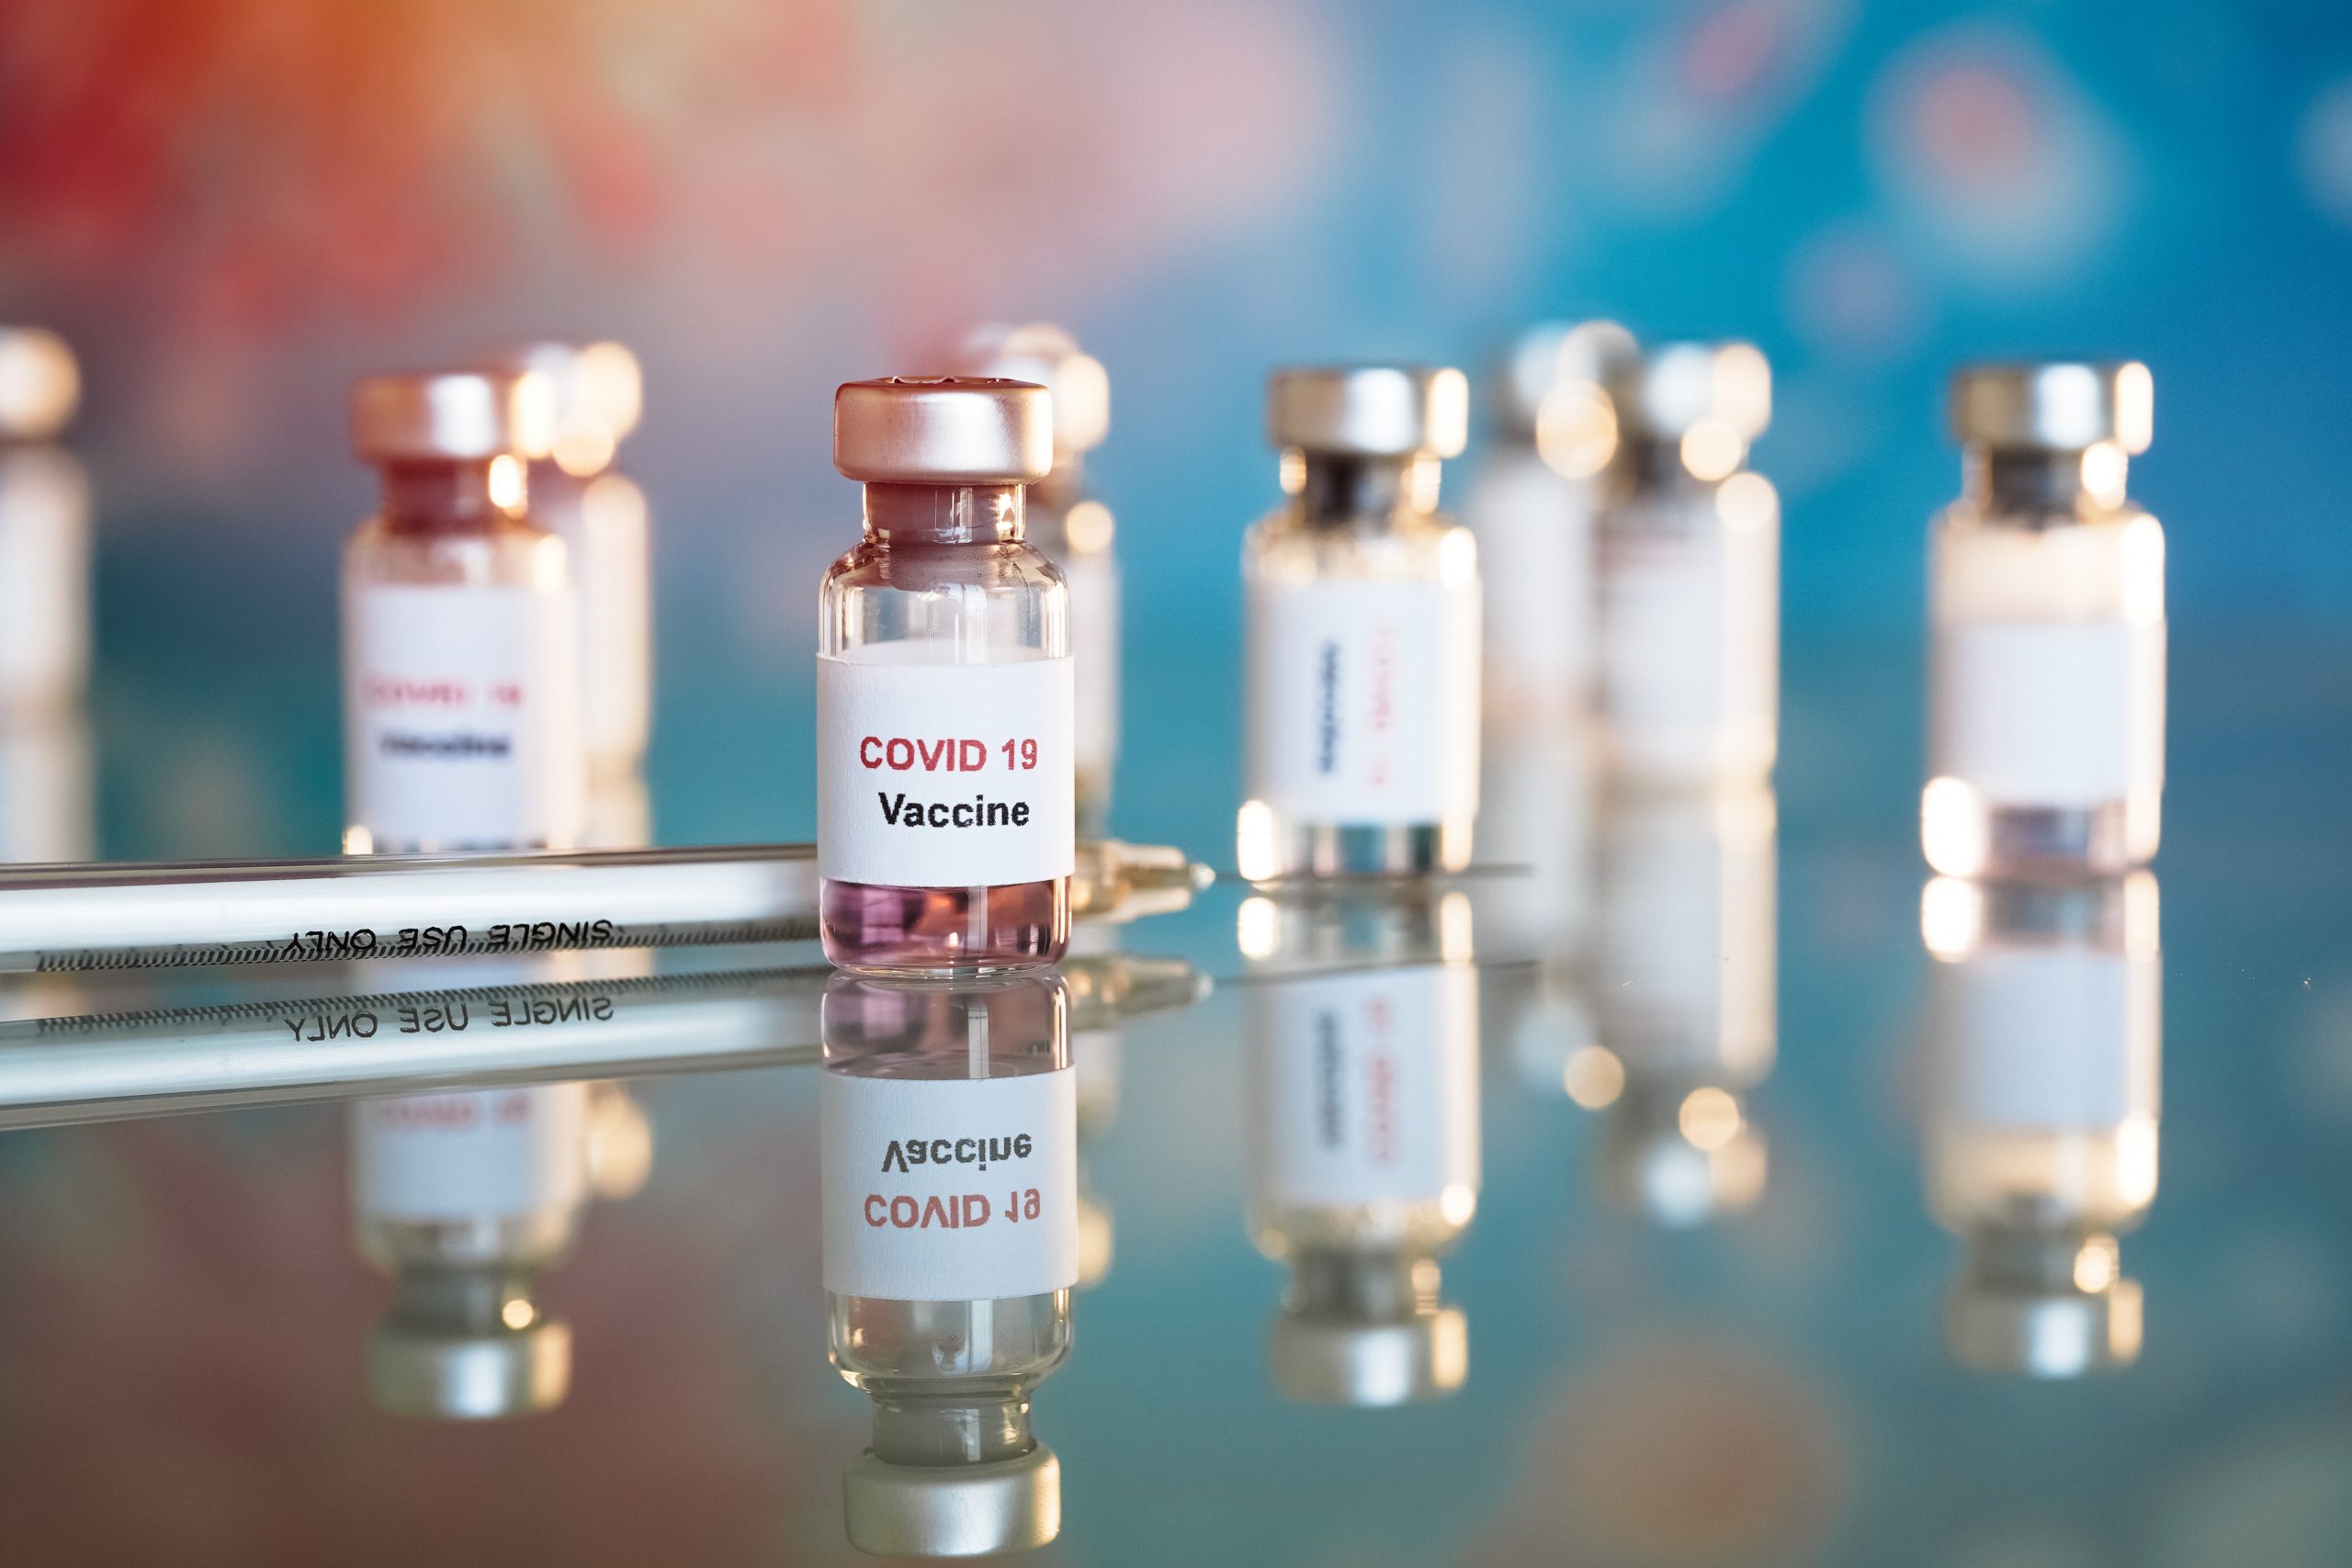 Can Healthcare Employers Require Employees to Receive the COVID-19 Vaccine?